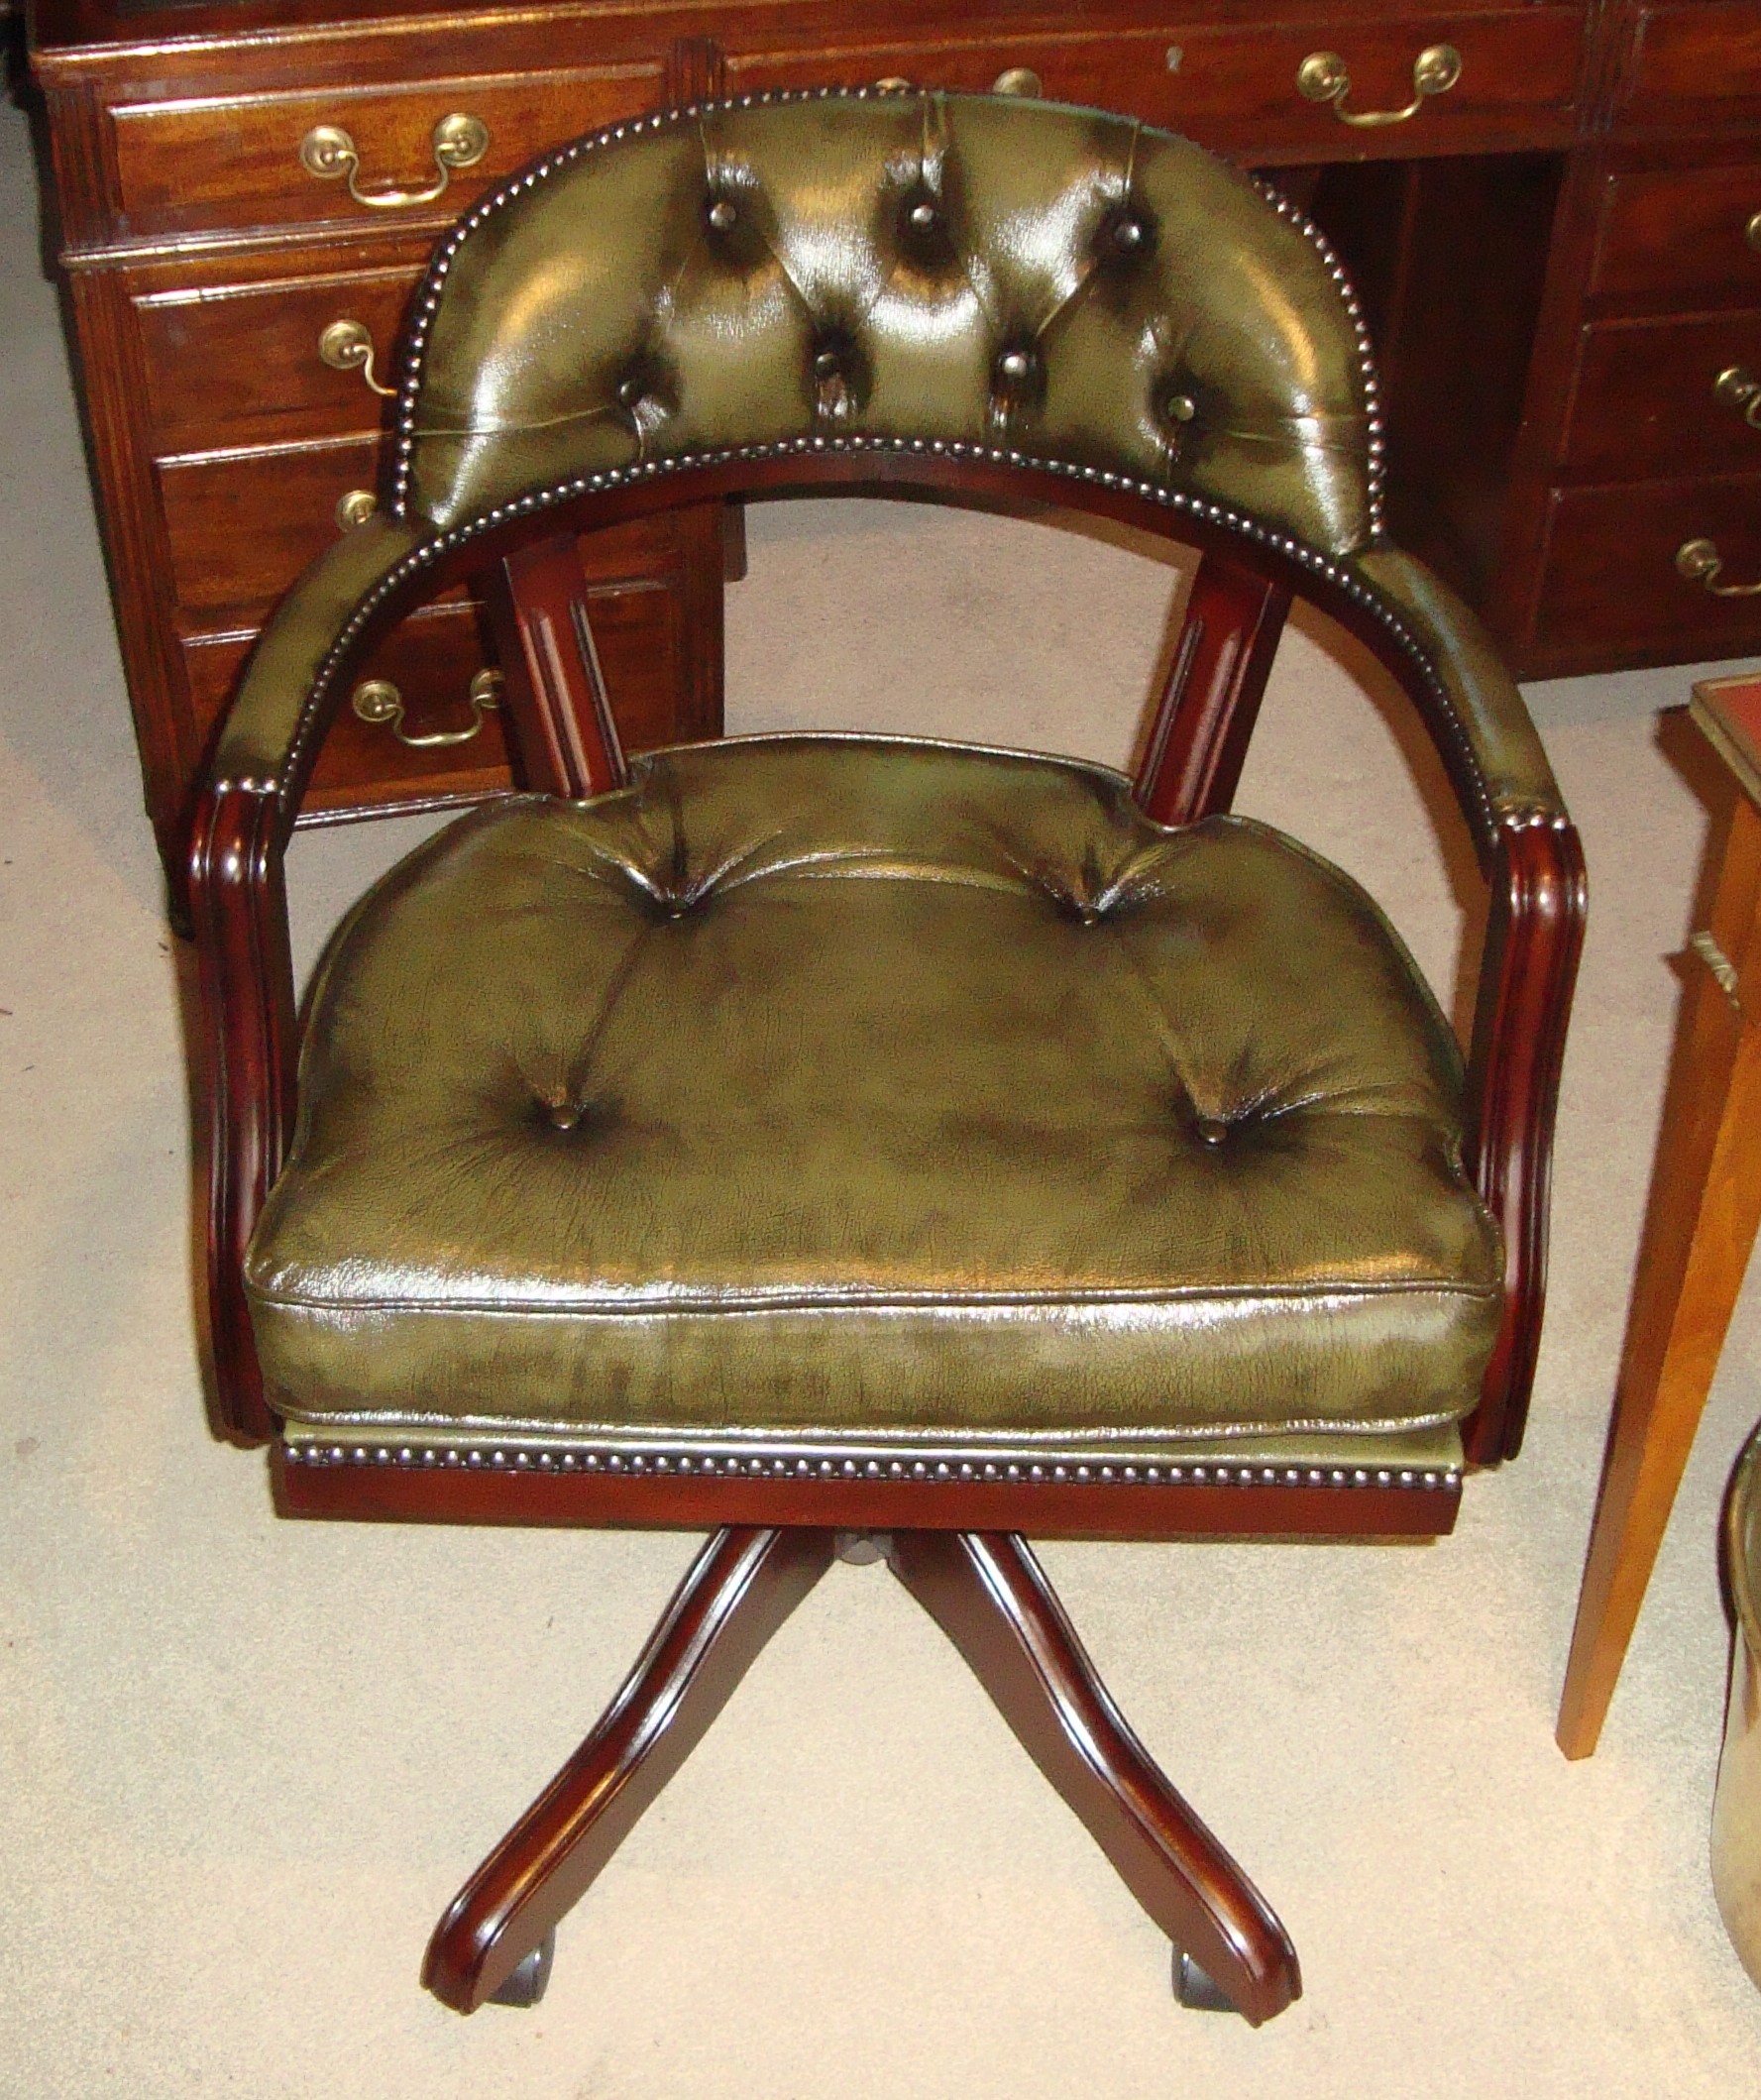 Reproduction Mahogany Framed Leather Upholstered Desk Chair